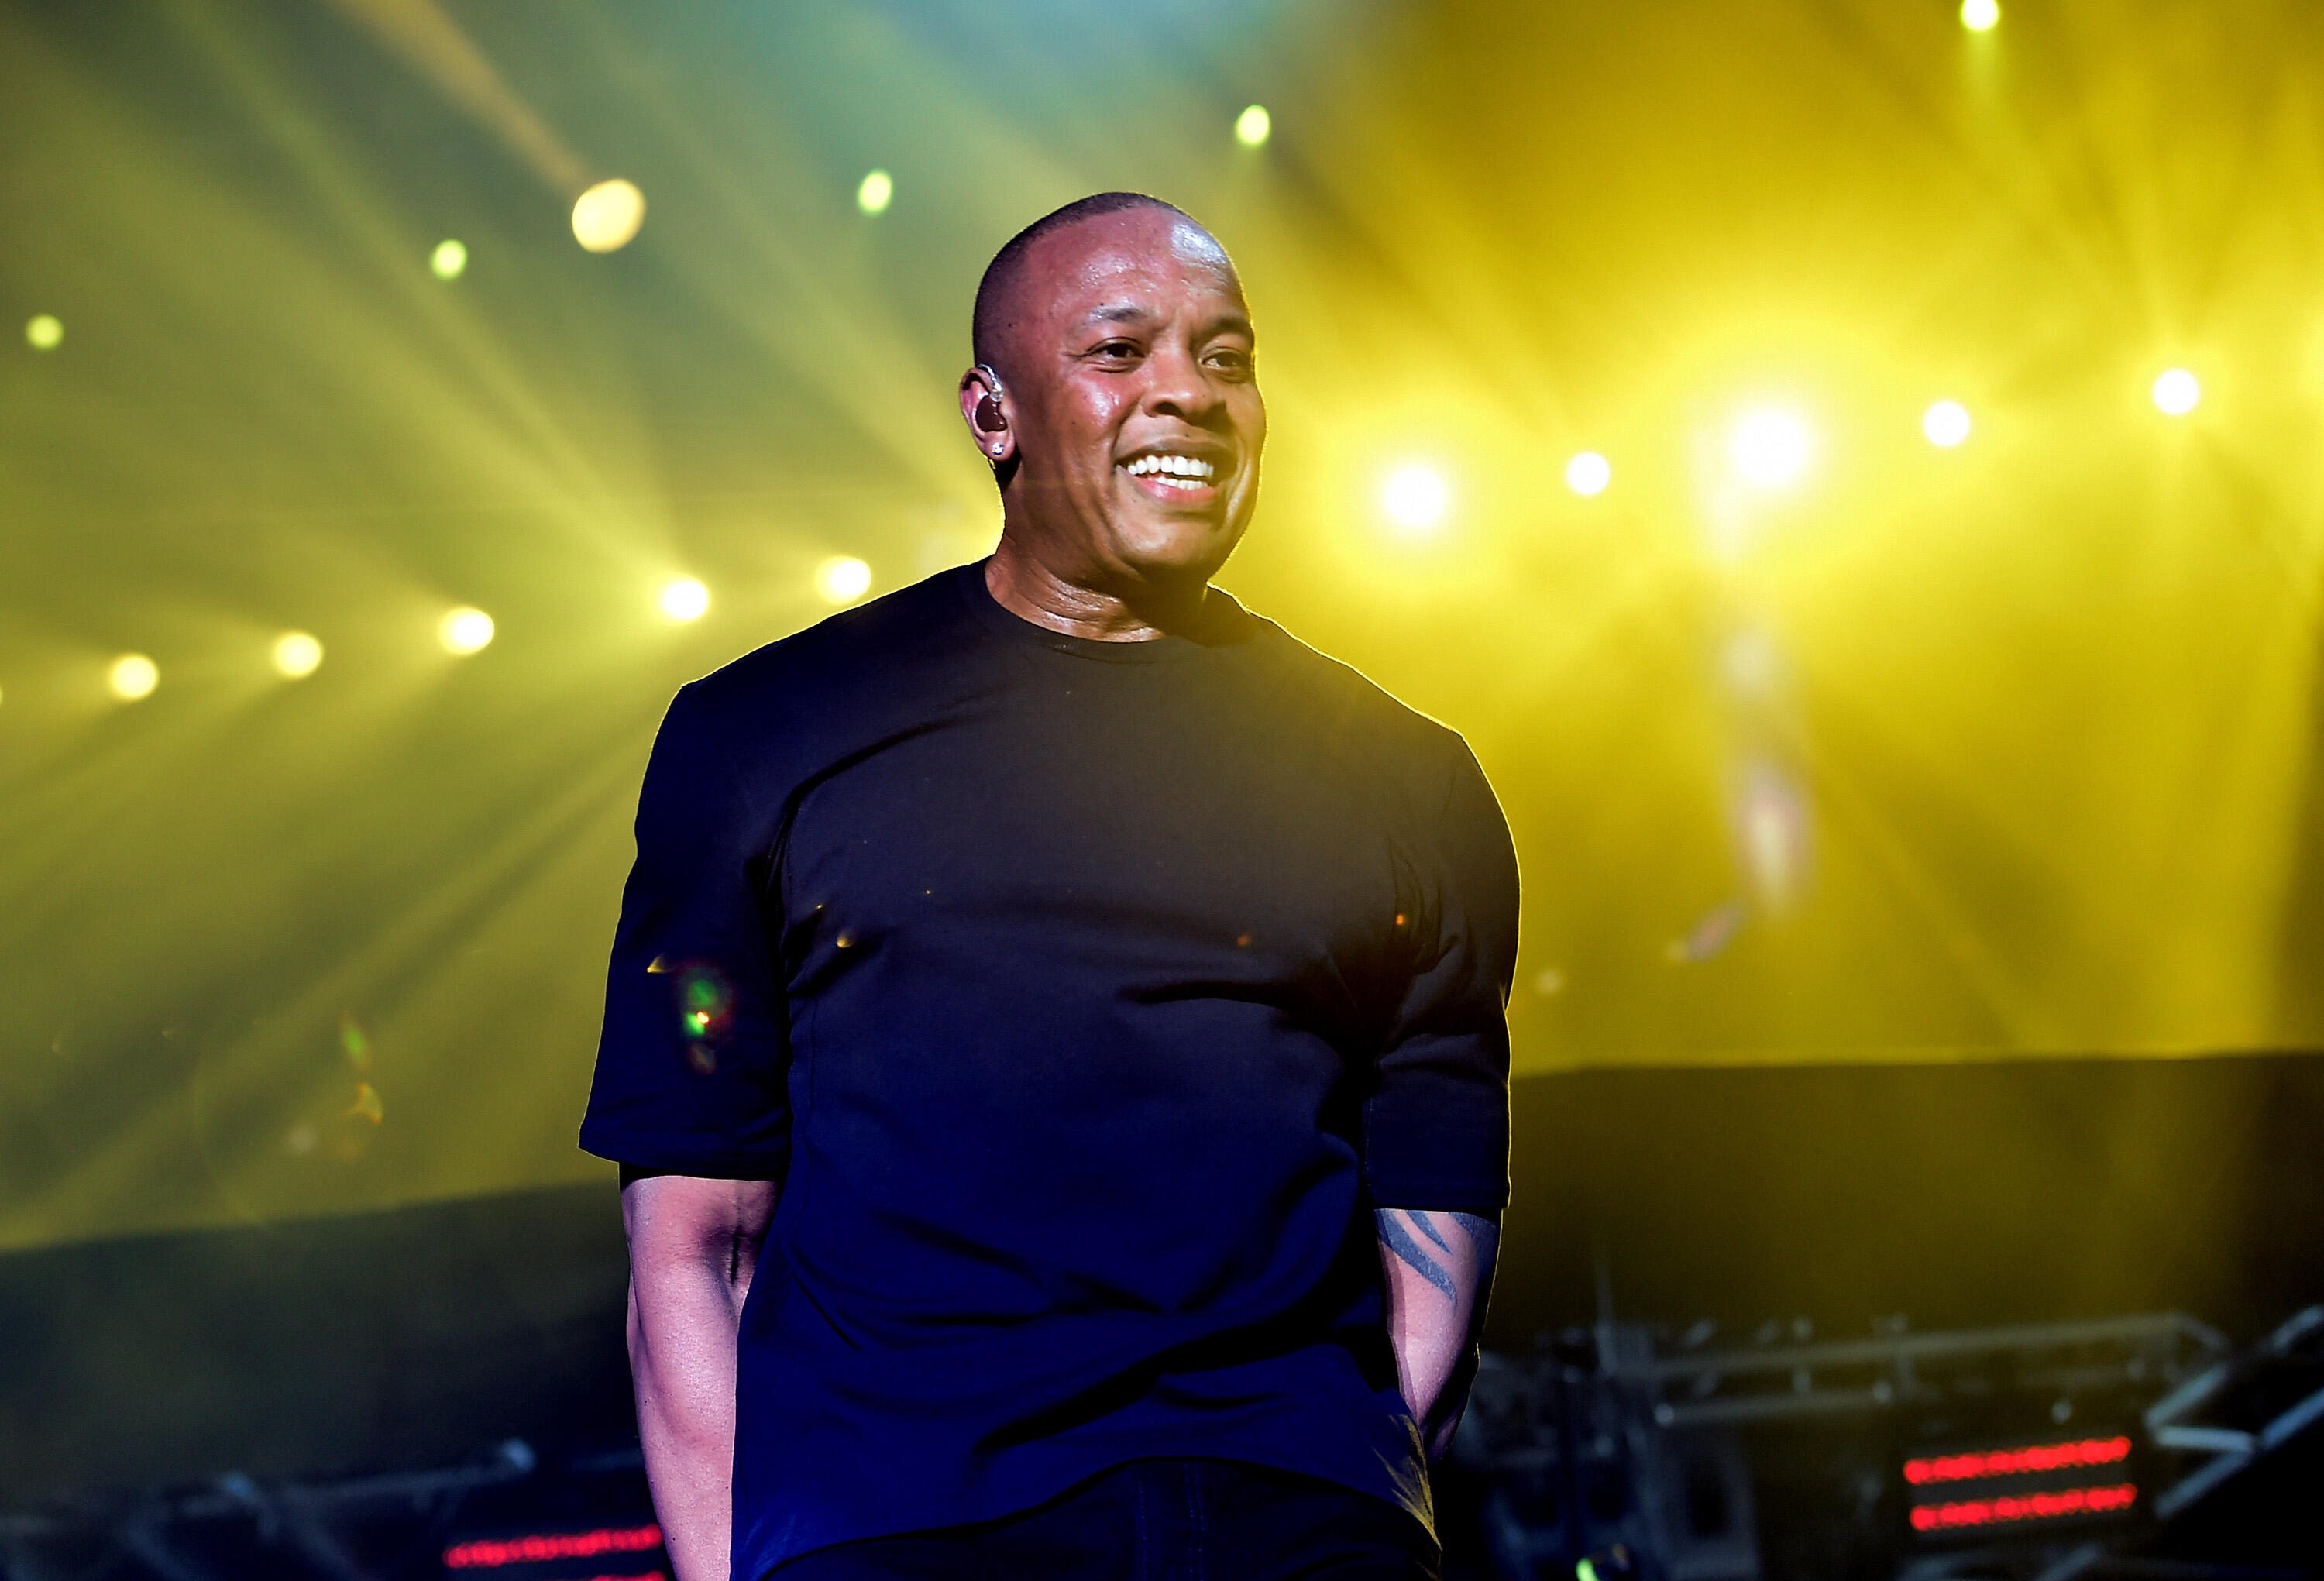 INDIO, CA - APRIL 23:  Recording artist Dr. Dre  performs onstage during day 2 of the 2016 Coachella Valley Music & Arts Festival Weekend 2 at the Empire Polo Club on April 23, 2016 in Indio, California.  (Photo by Kevin Winter/Getty Images for Coachella)